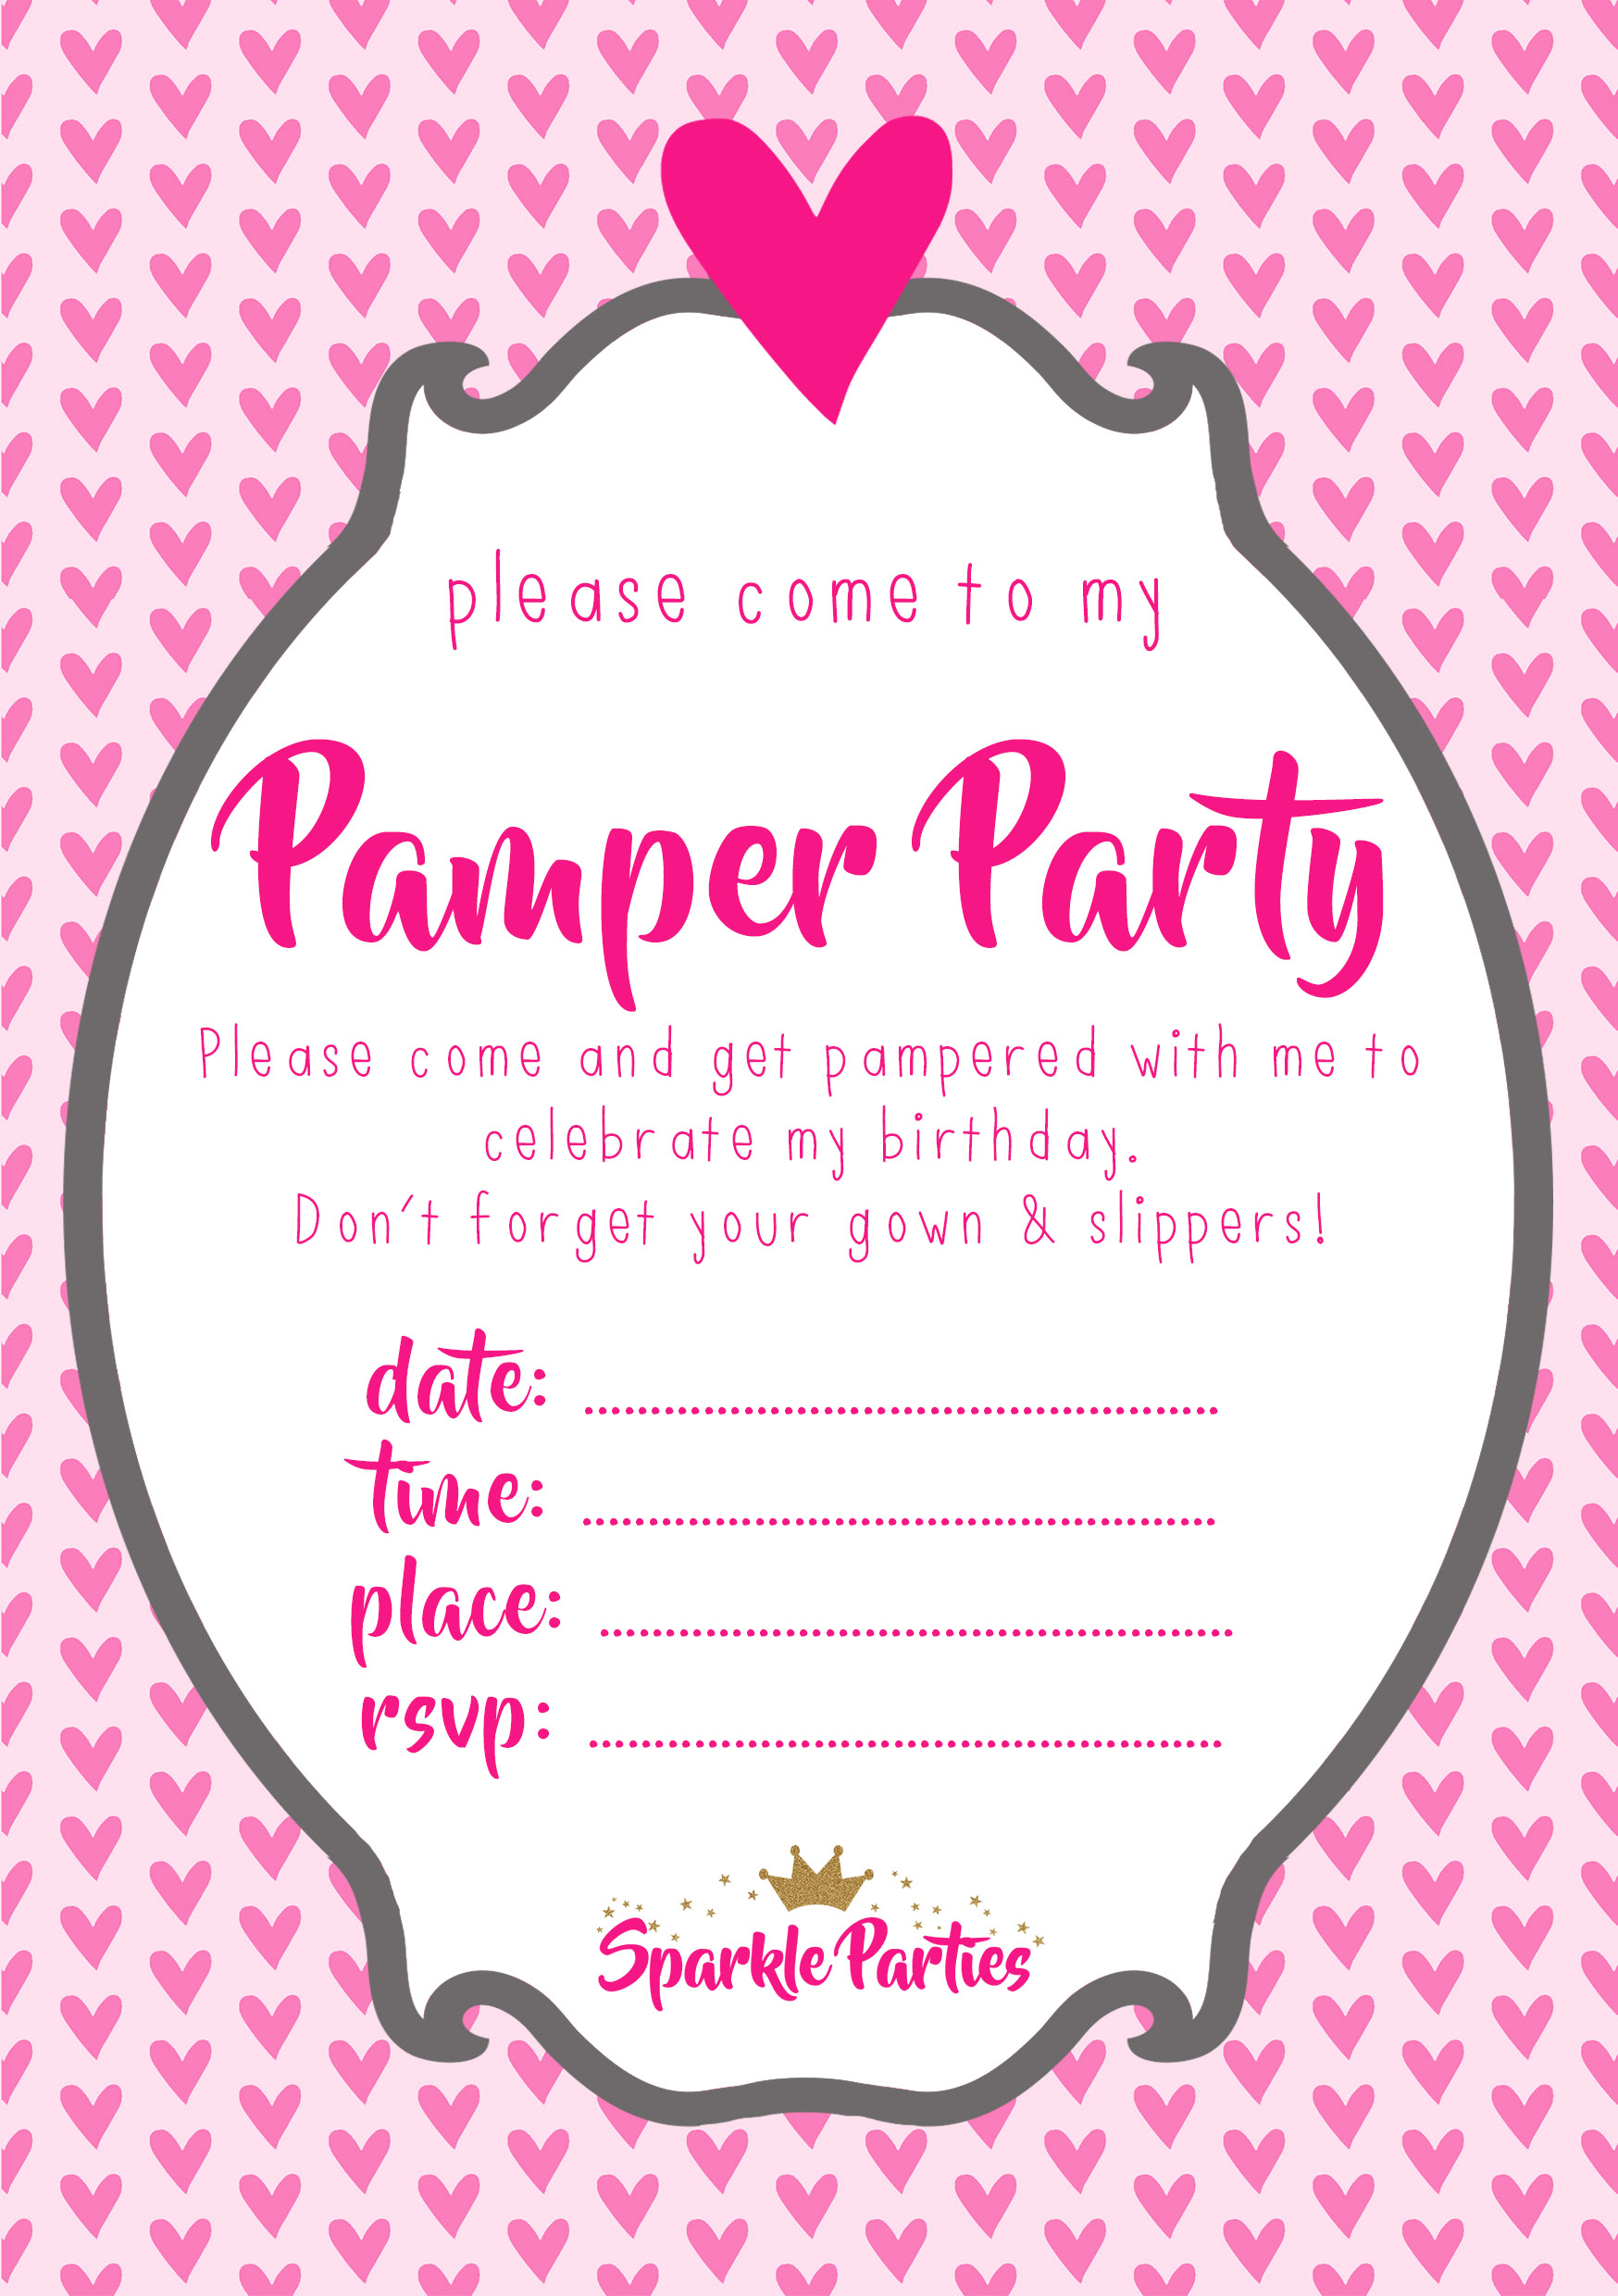 pamper-party-invitation-templates-business-template-ideas